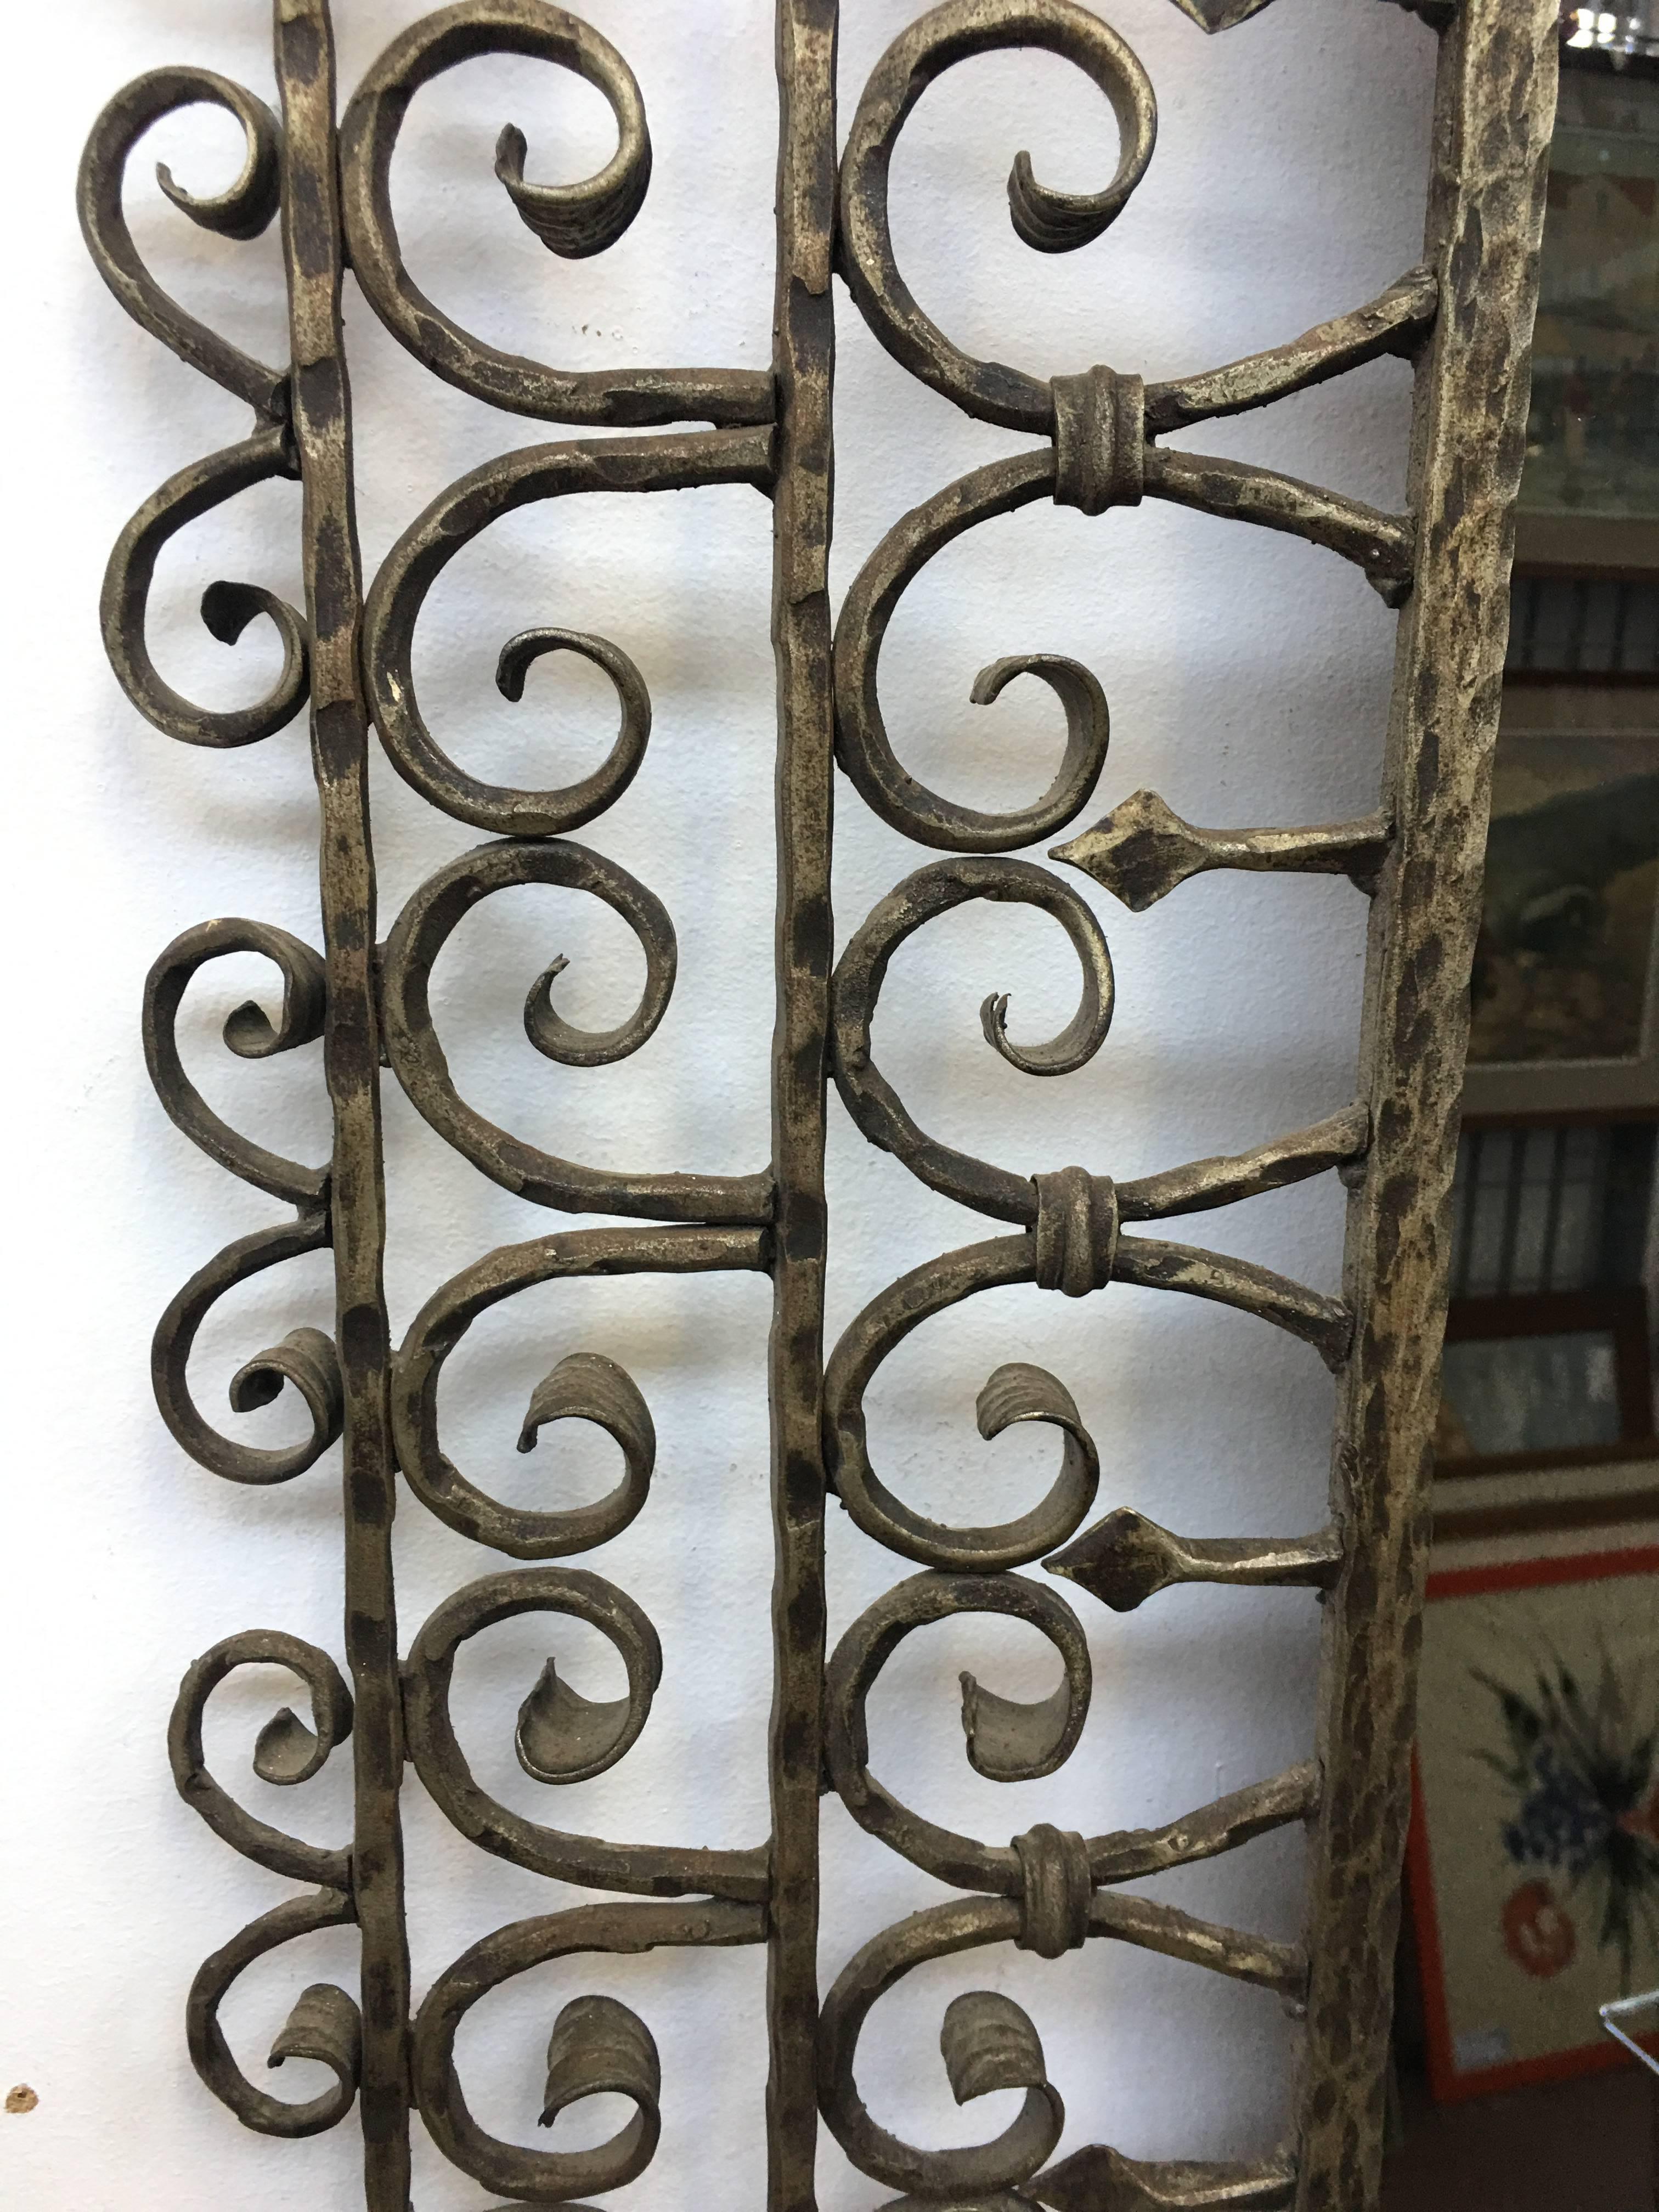 Incredible wrought iron wall smoked mirror. Made in Italy by "VETRARP Pisa"

Free shipping all around the worlds.